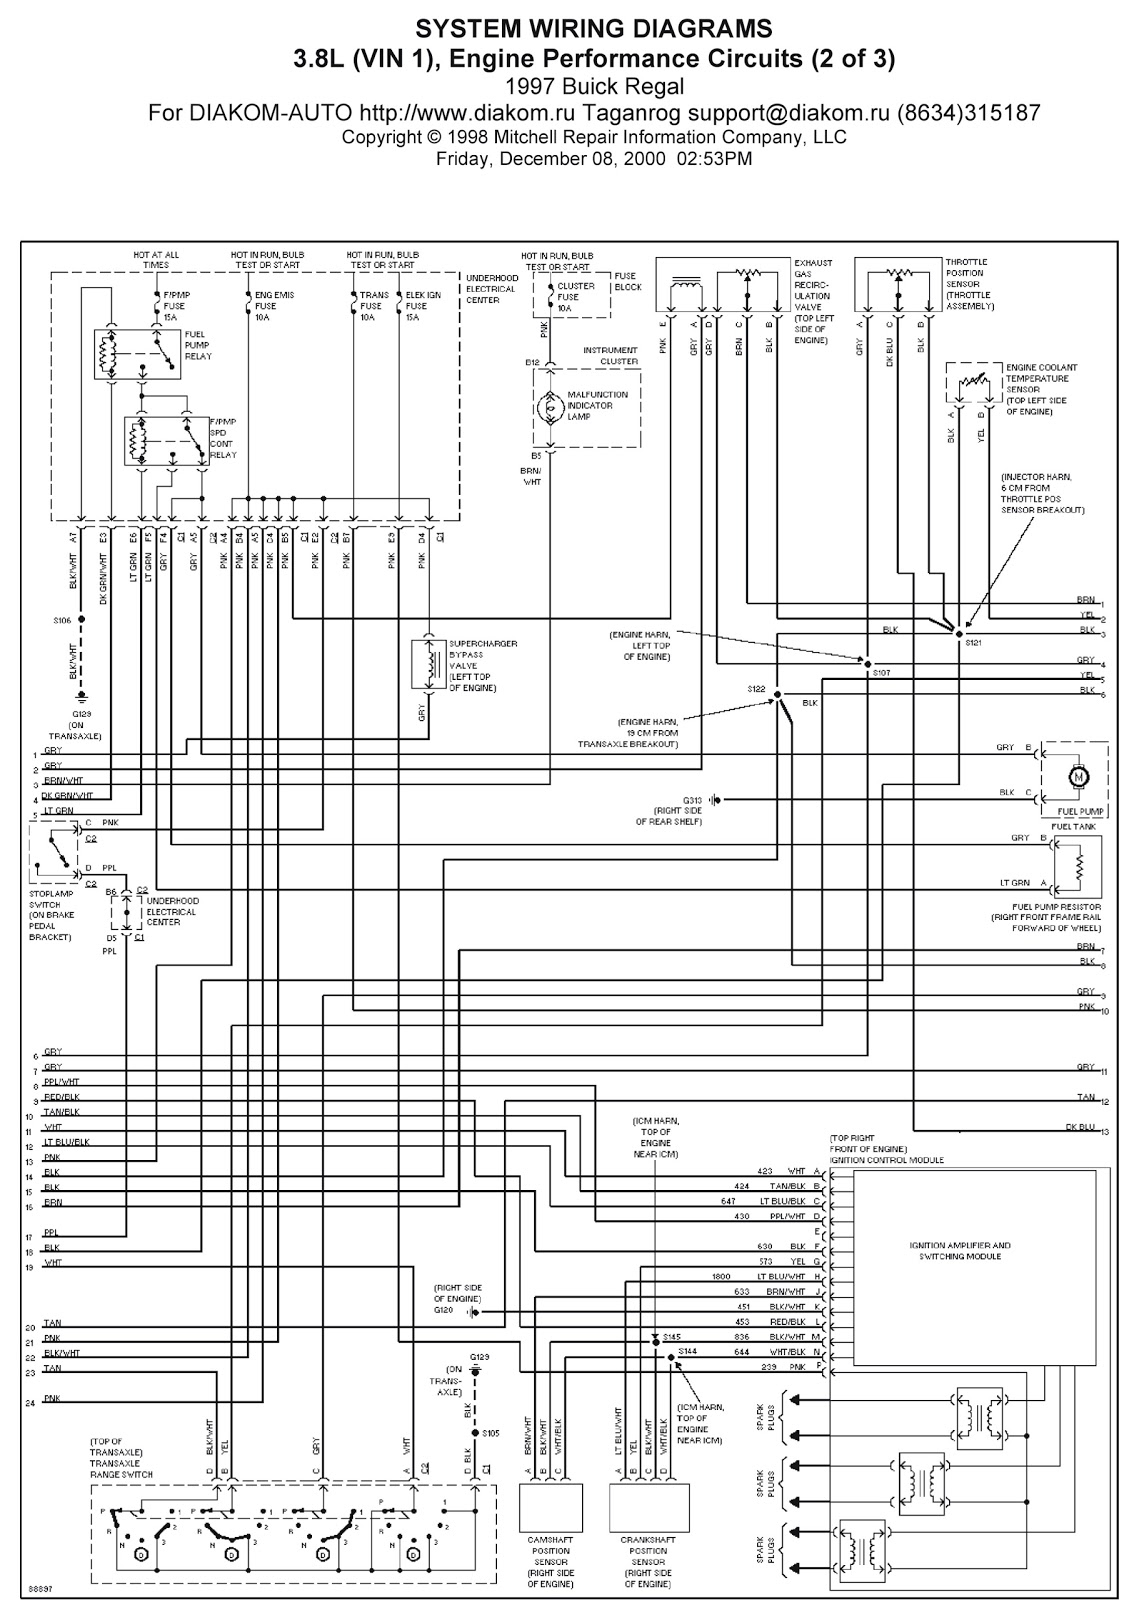 1992 Buick Riviera Wiring Diagram Only from 4.bp.blogspot.com